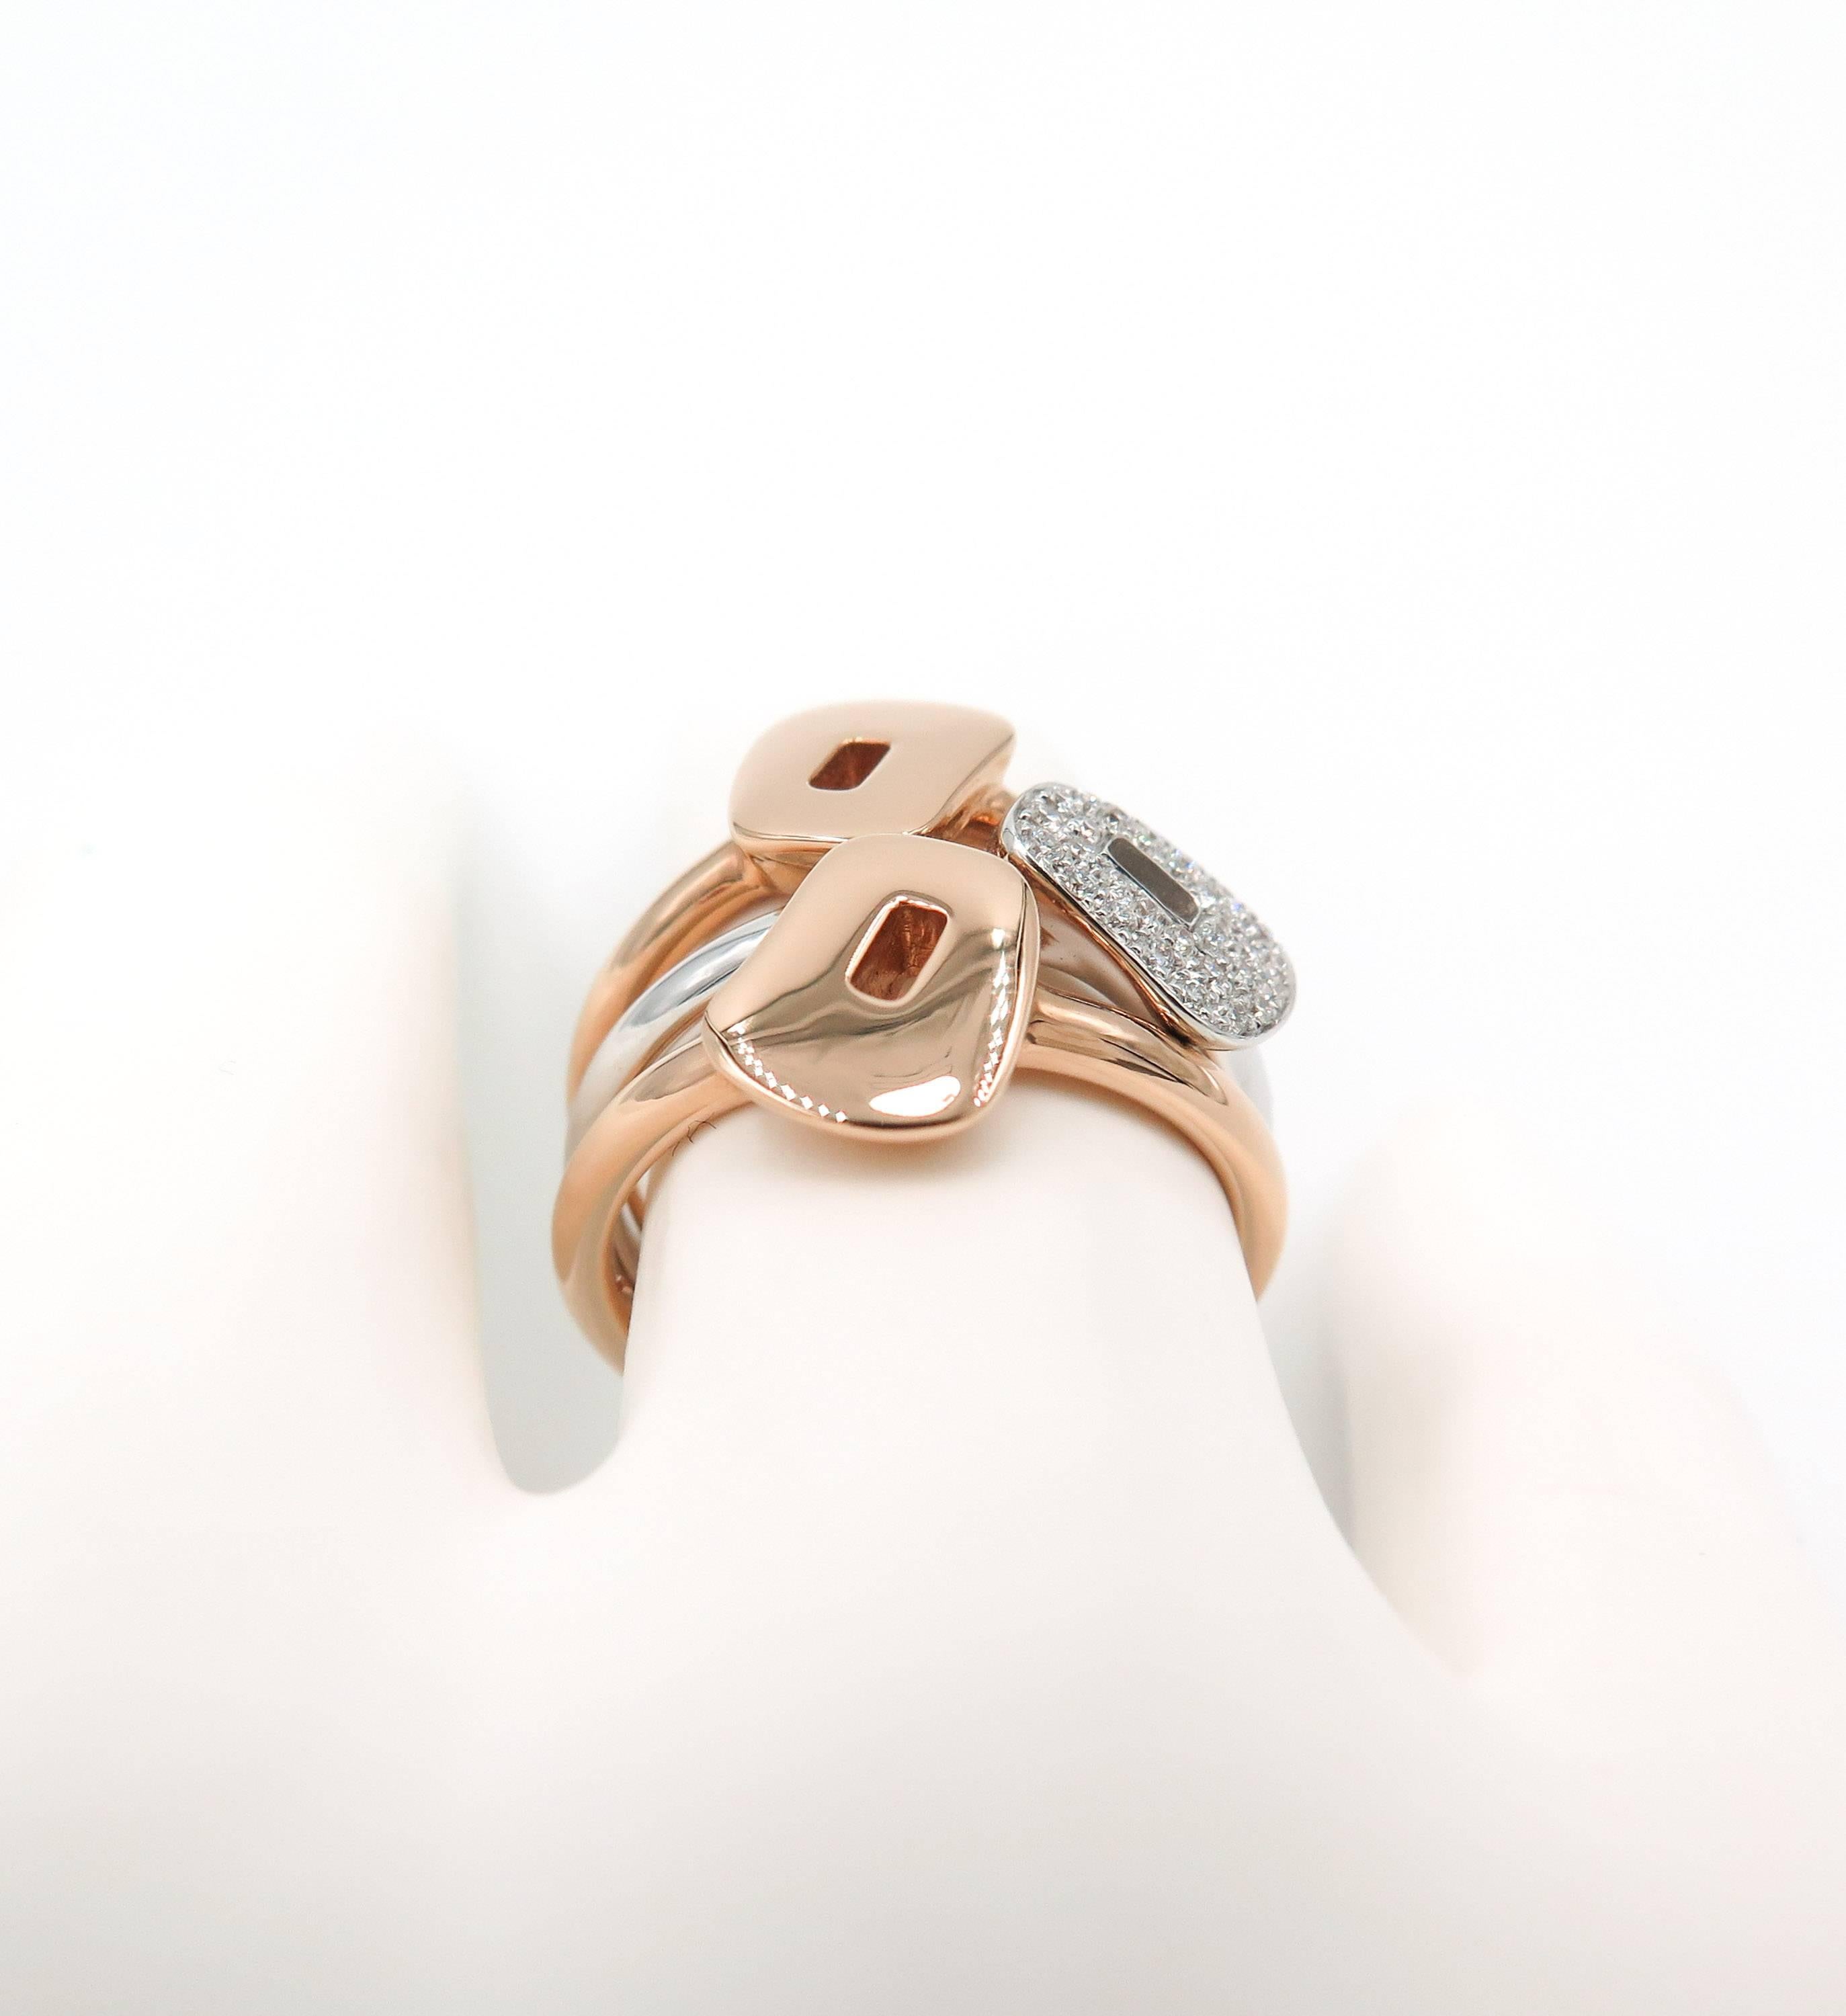 Women's Rose Gold Puzzle Ring by Mattioli